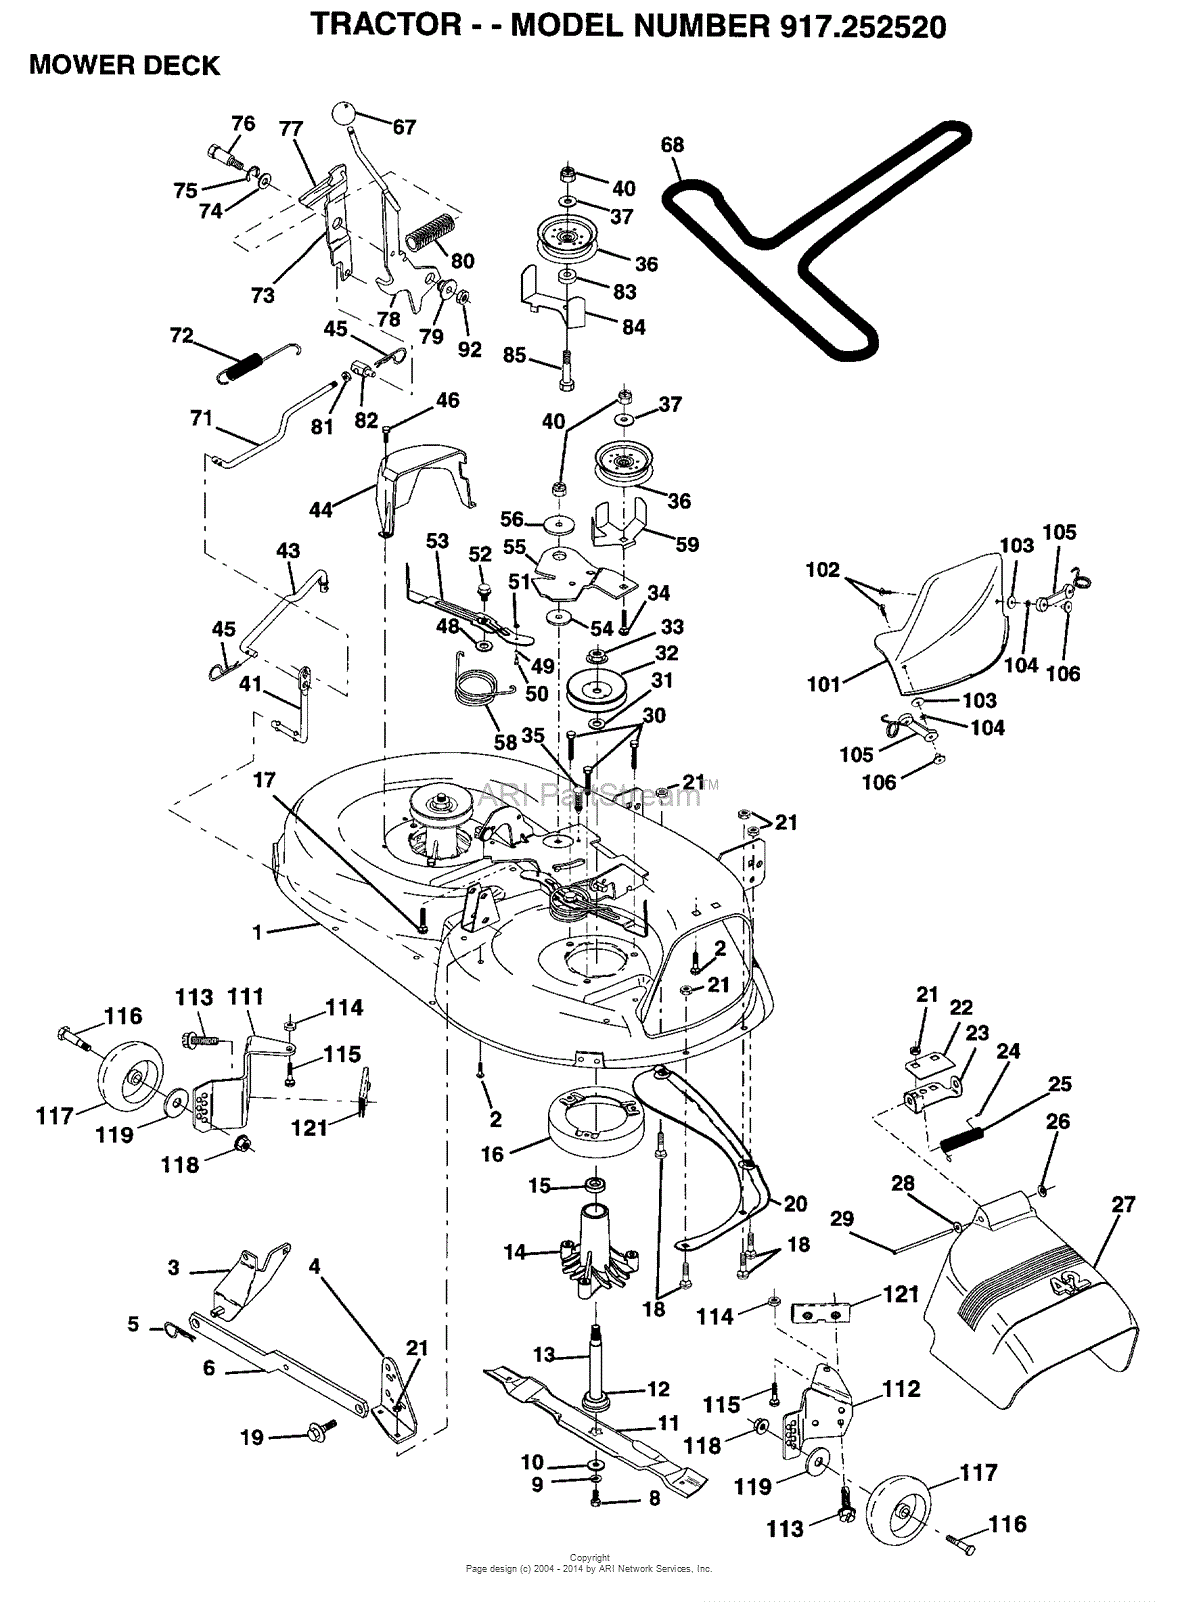 AYP/Electrolux 917.252520 (1999 & Before) Parts Diagram for MOWER DECK